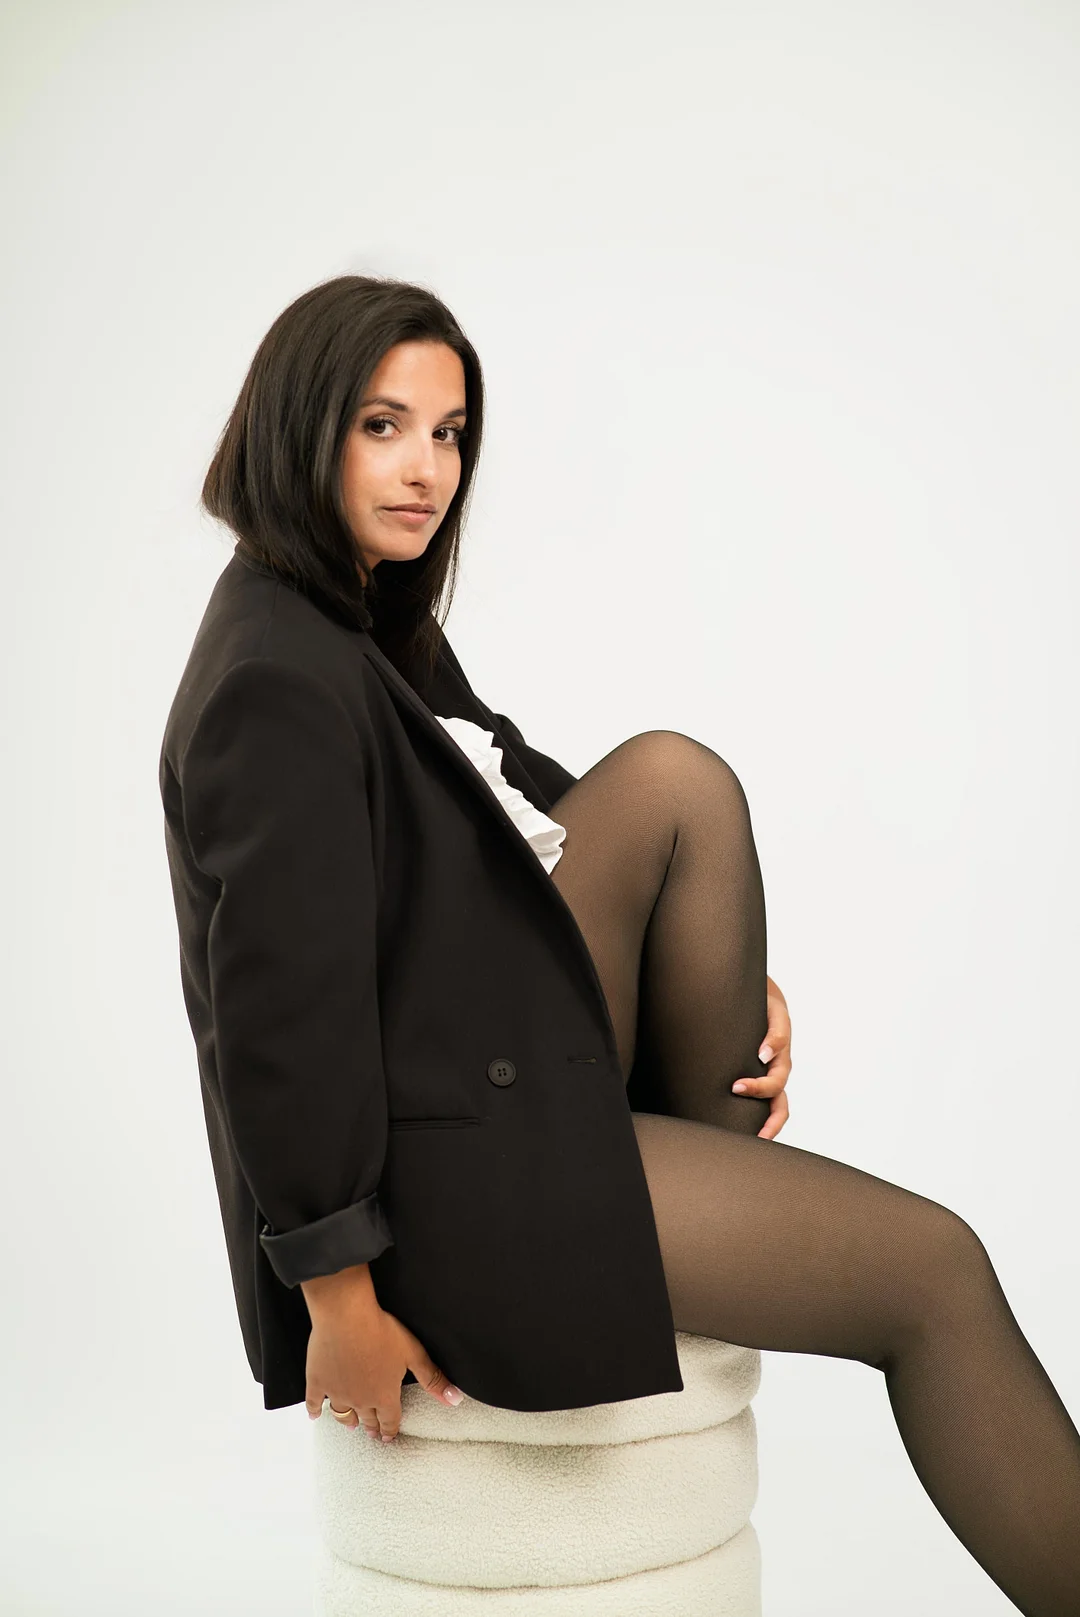 Have A Brand New Leggings- Flawless Naked Feeling Fleece Lined Tights